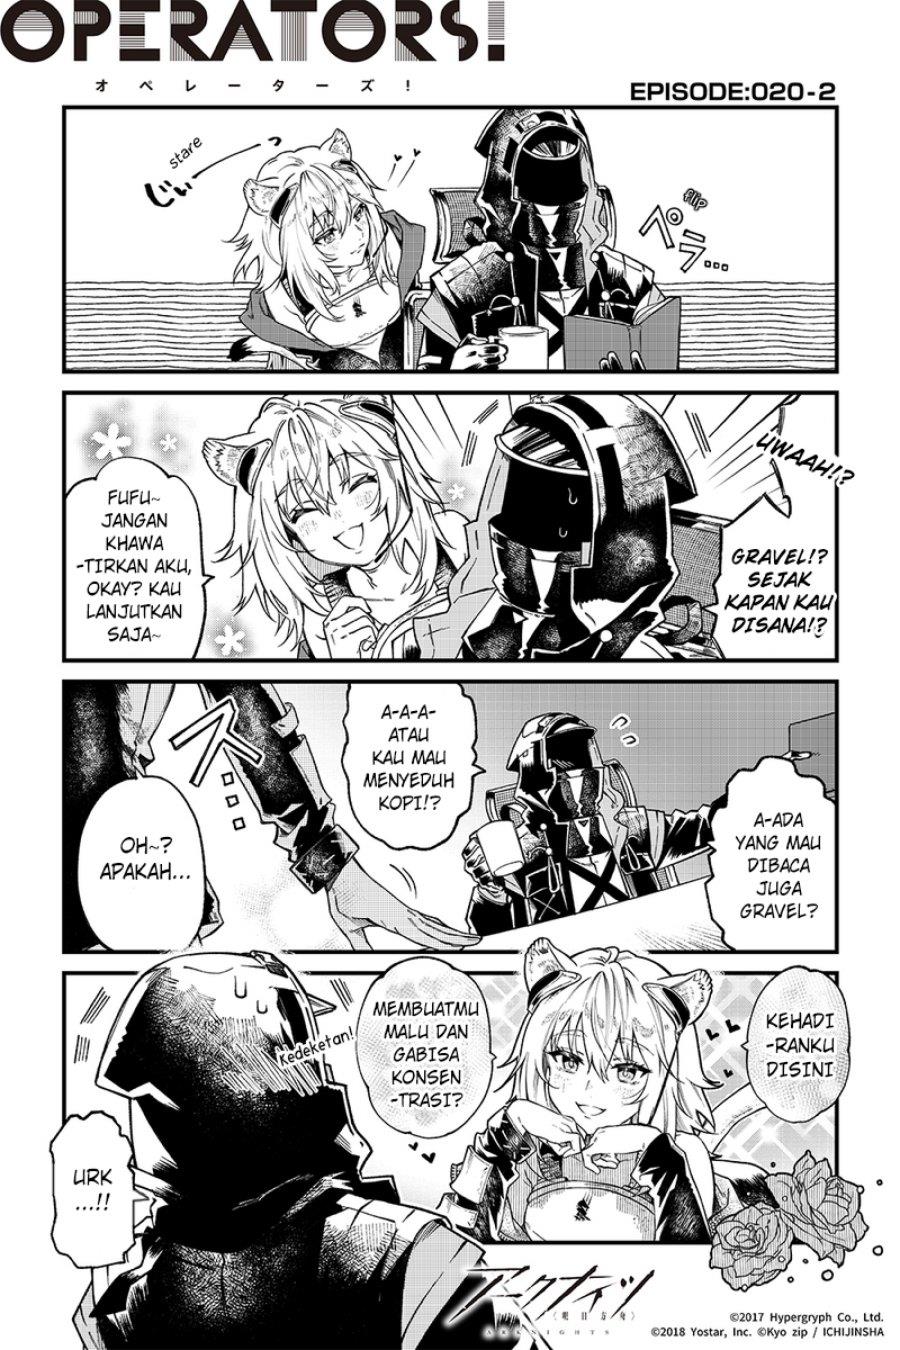 Arknights: OPERATORS! Chapter 20